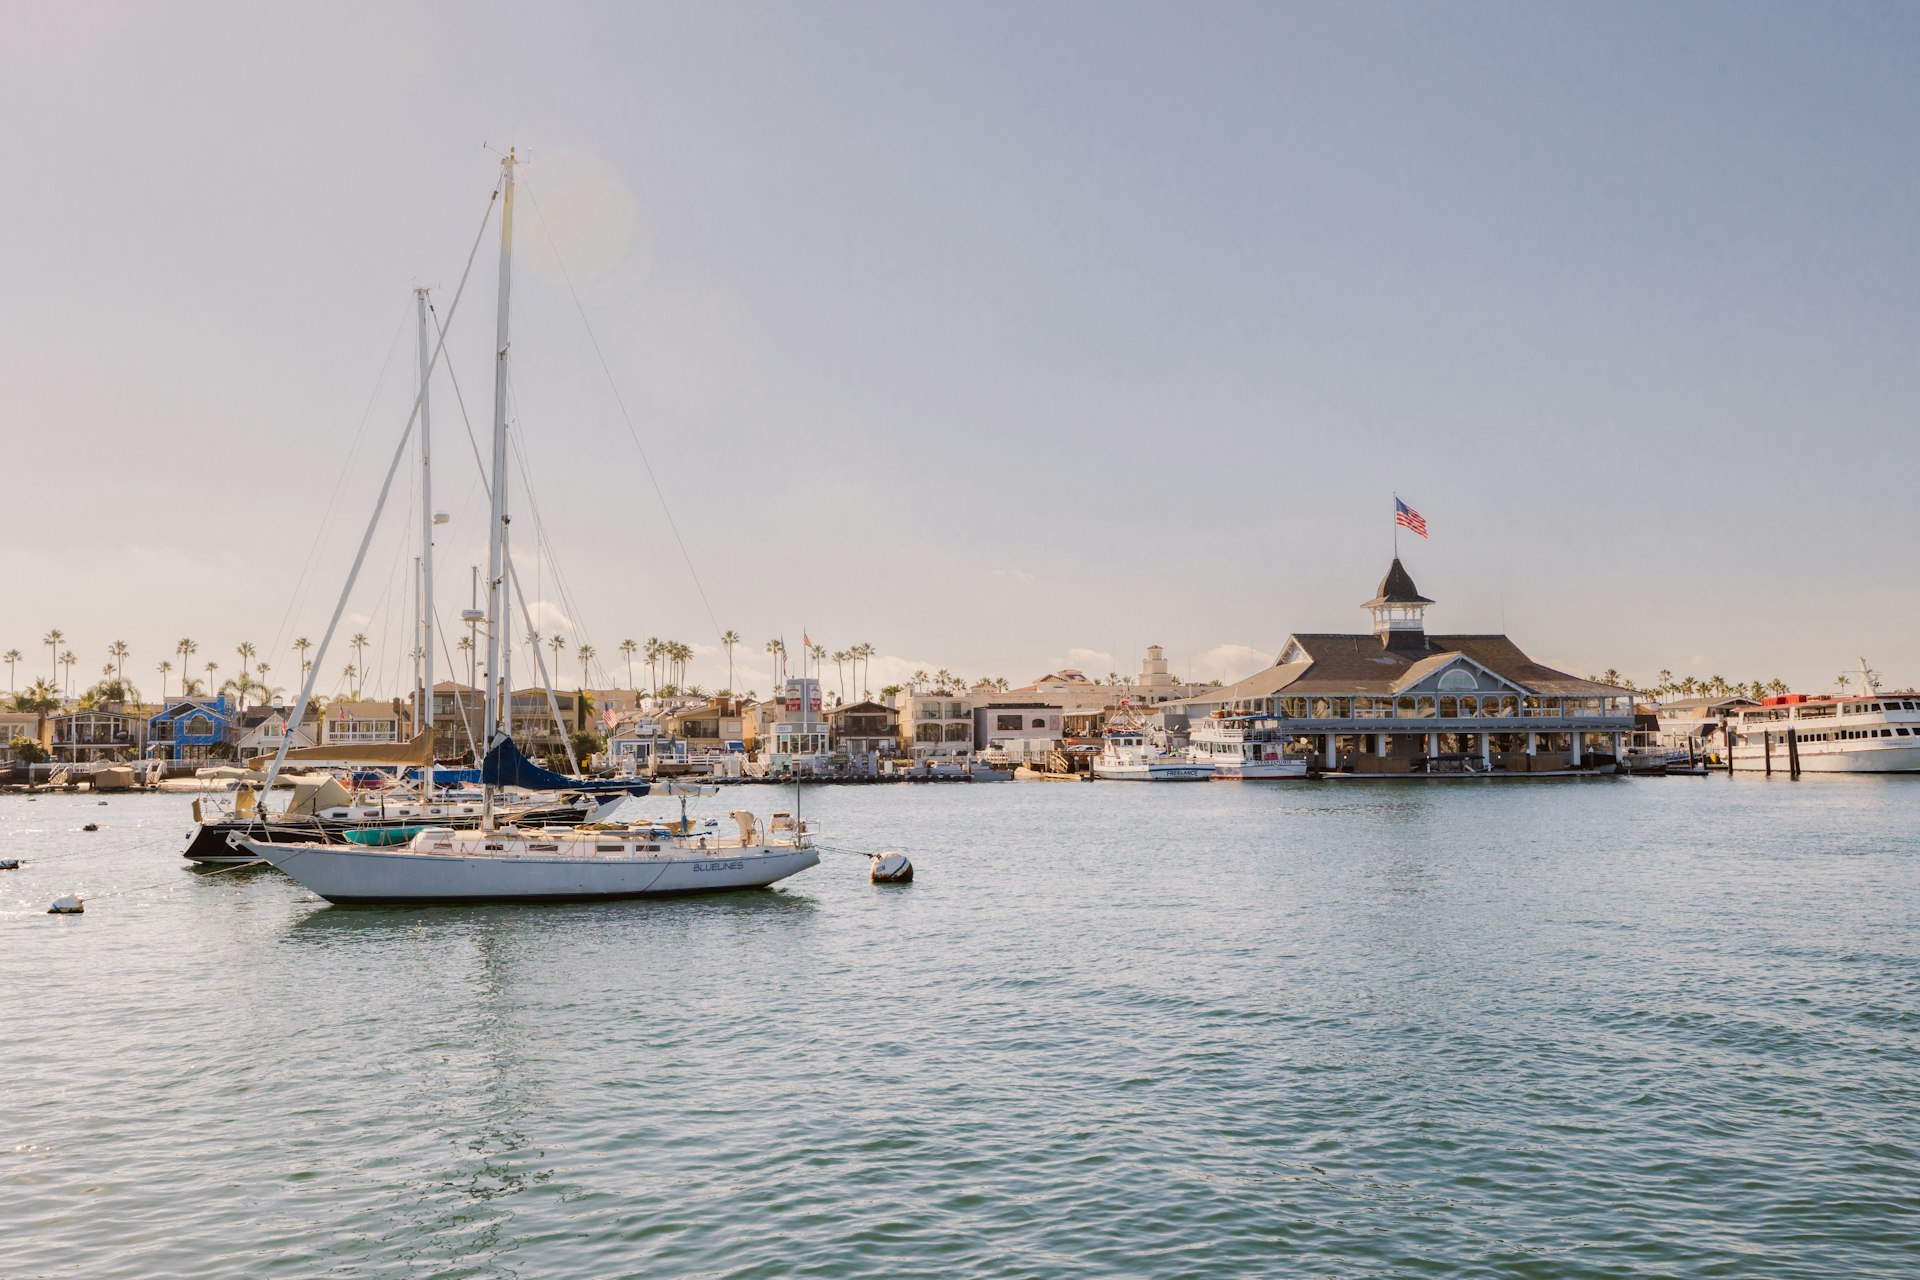 Newport Harbor with sailboats in the foreground and Balboa Pavillion in the background